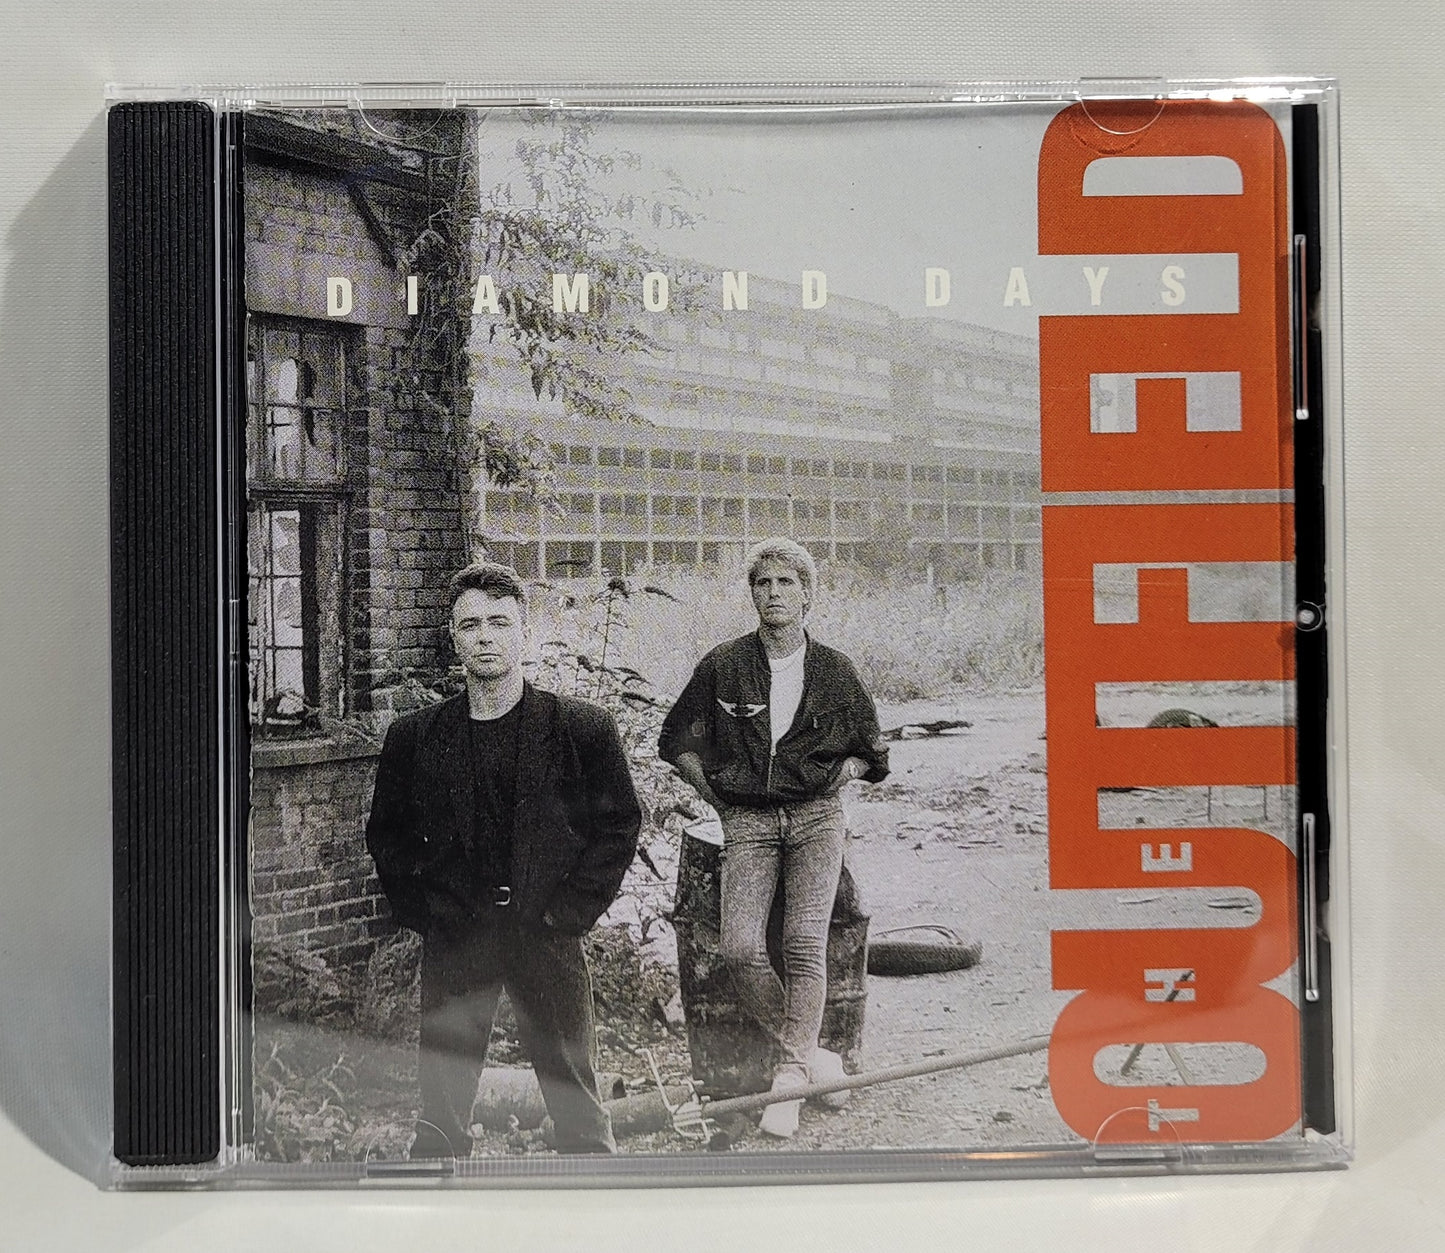 The Outfield - Diamond Days [CD]